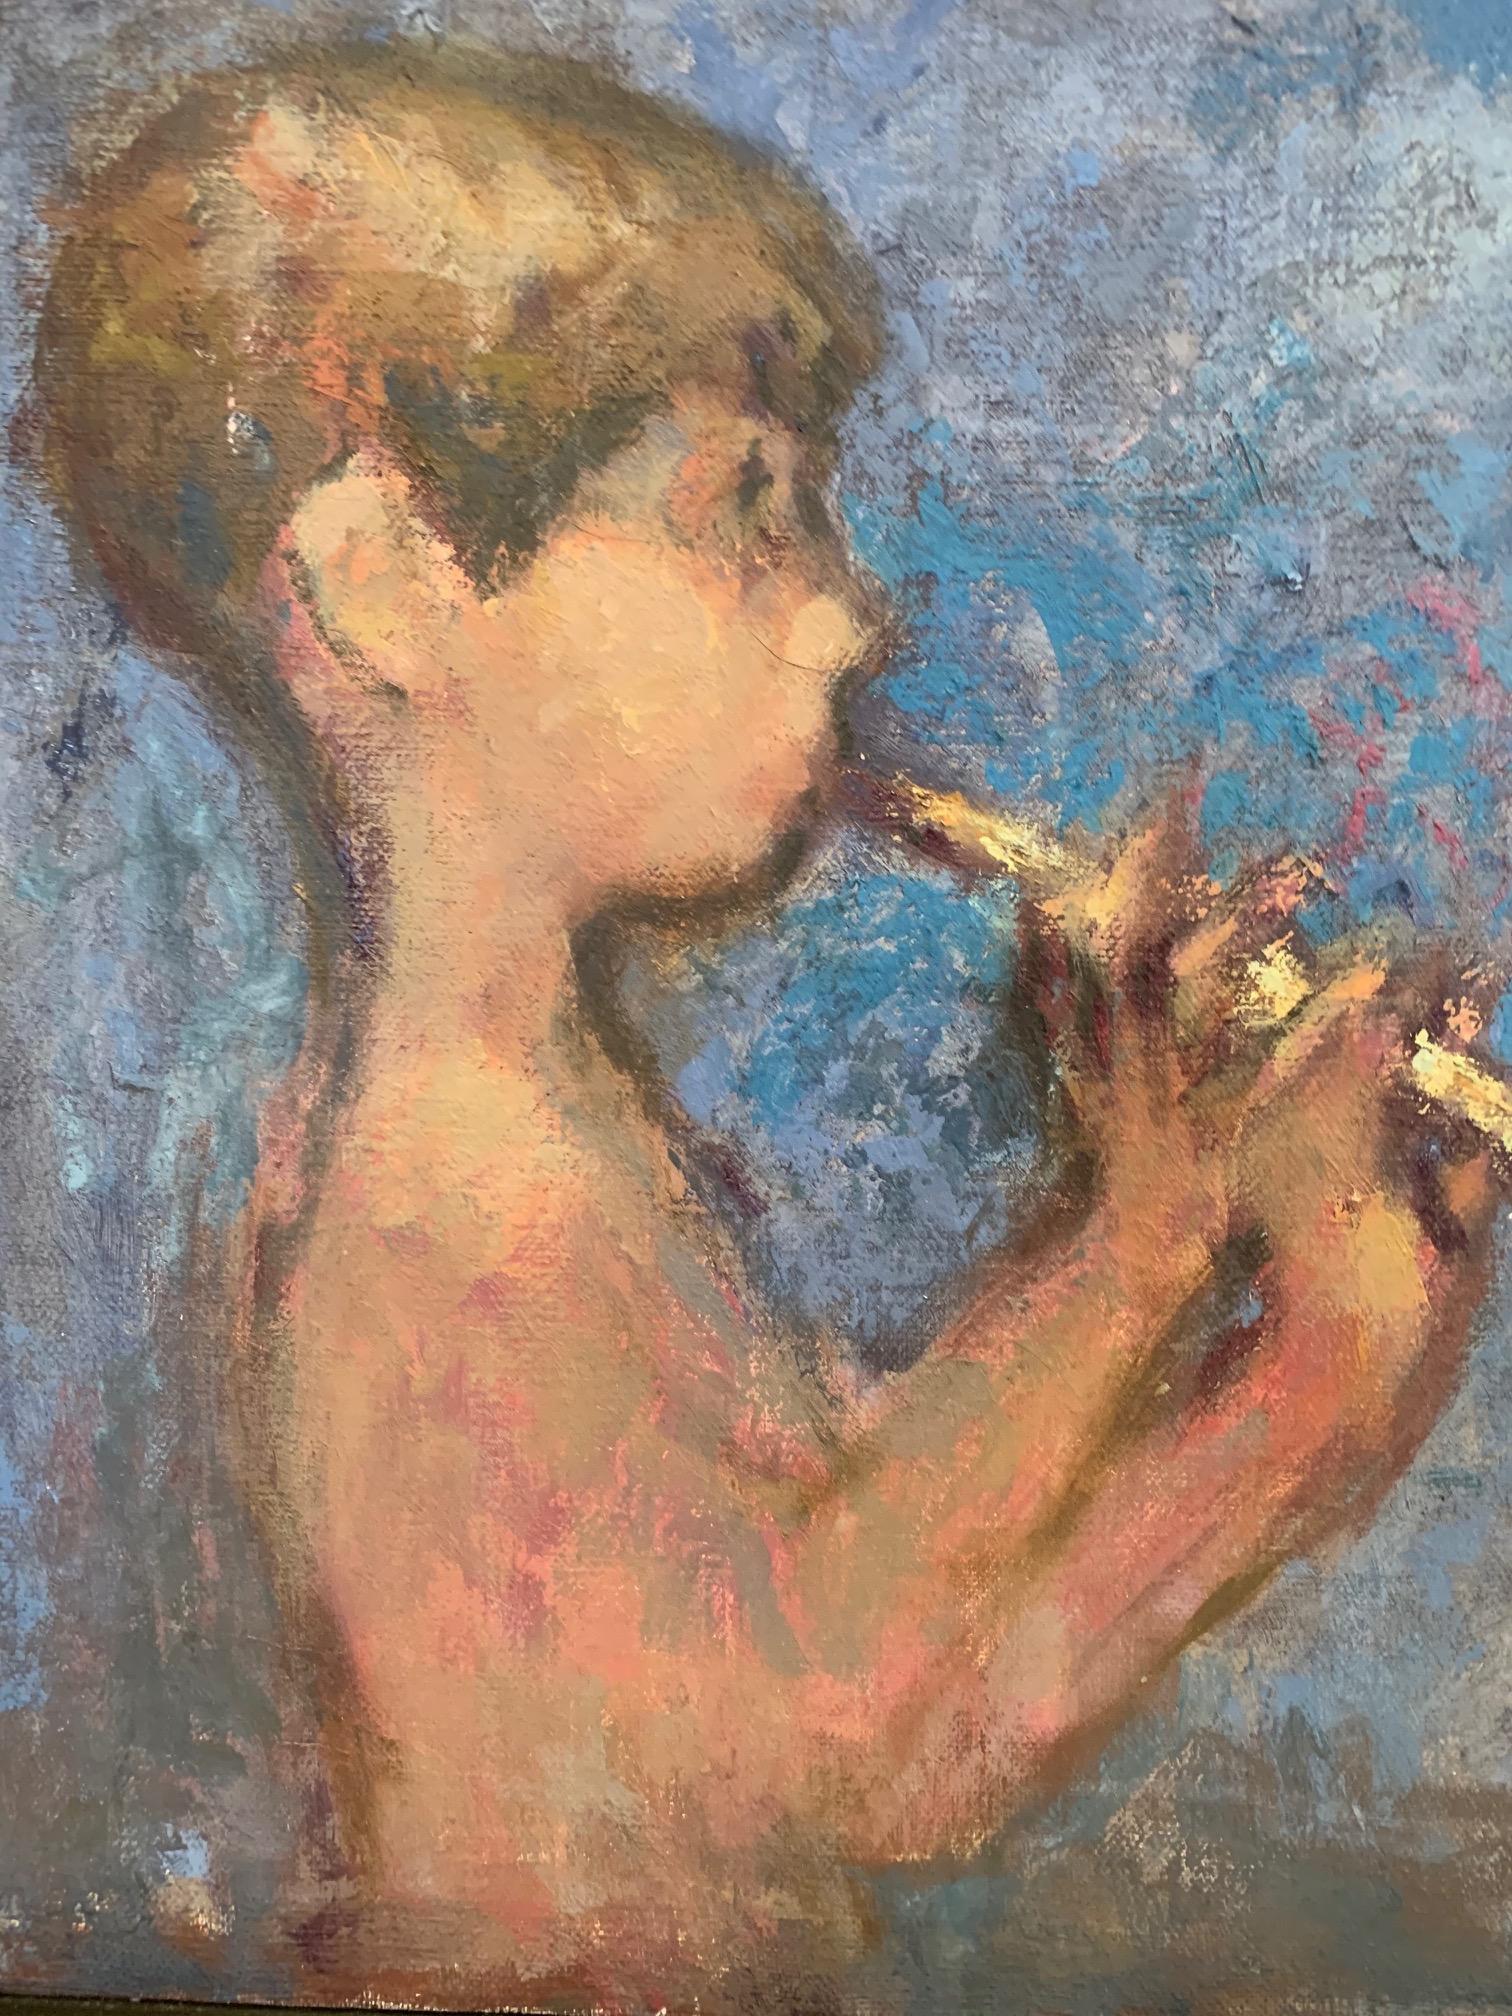 A beautifully rendered oil on canvas of a young boy playing a flute in a wonderful mix of dreamy blues and pinks.
Signed TKS
Original frame gold leaf and ebonized wood.
           